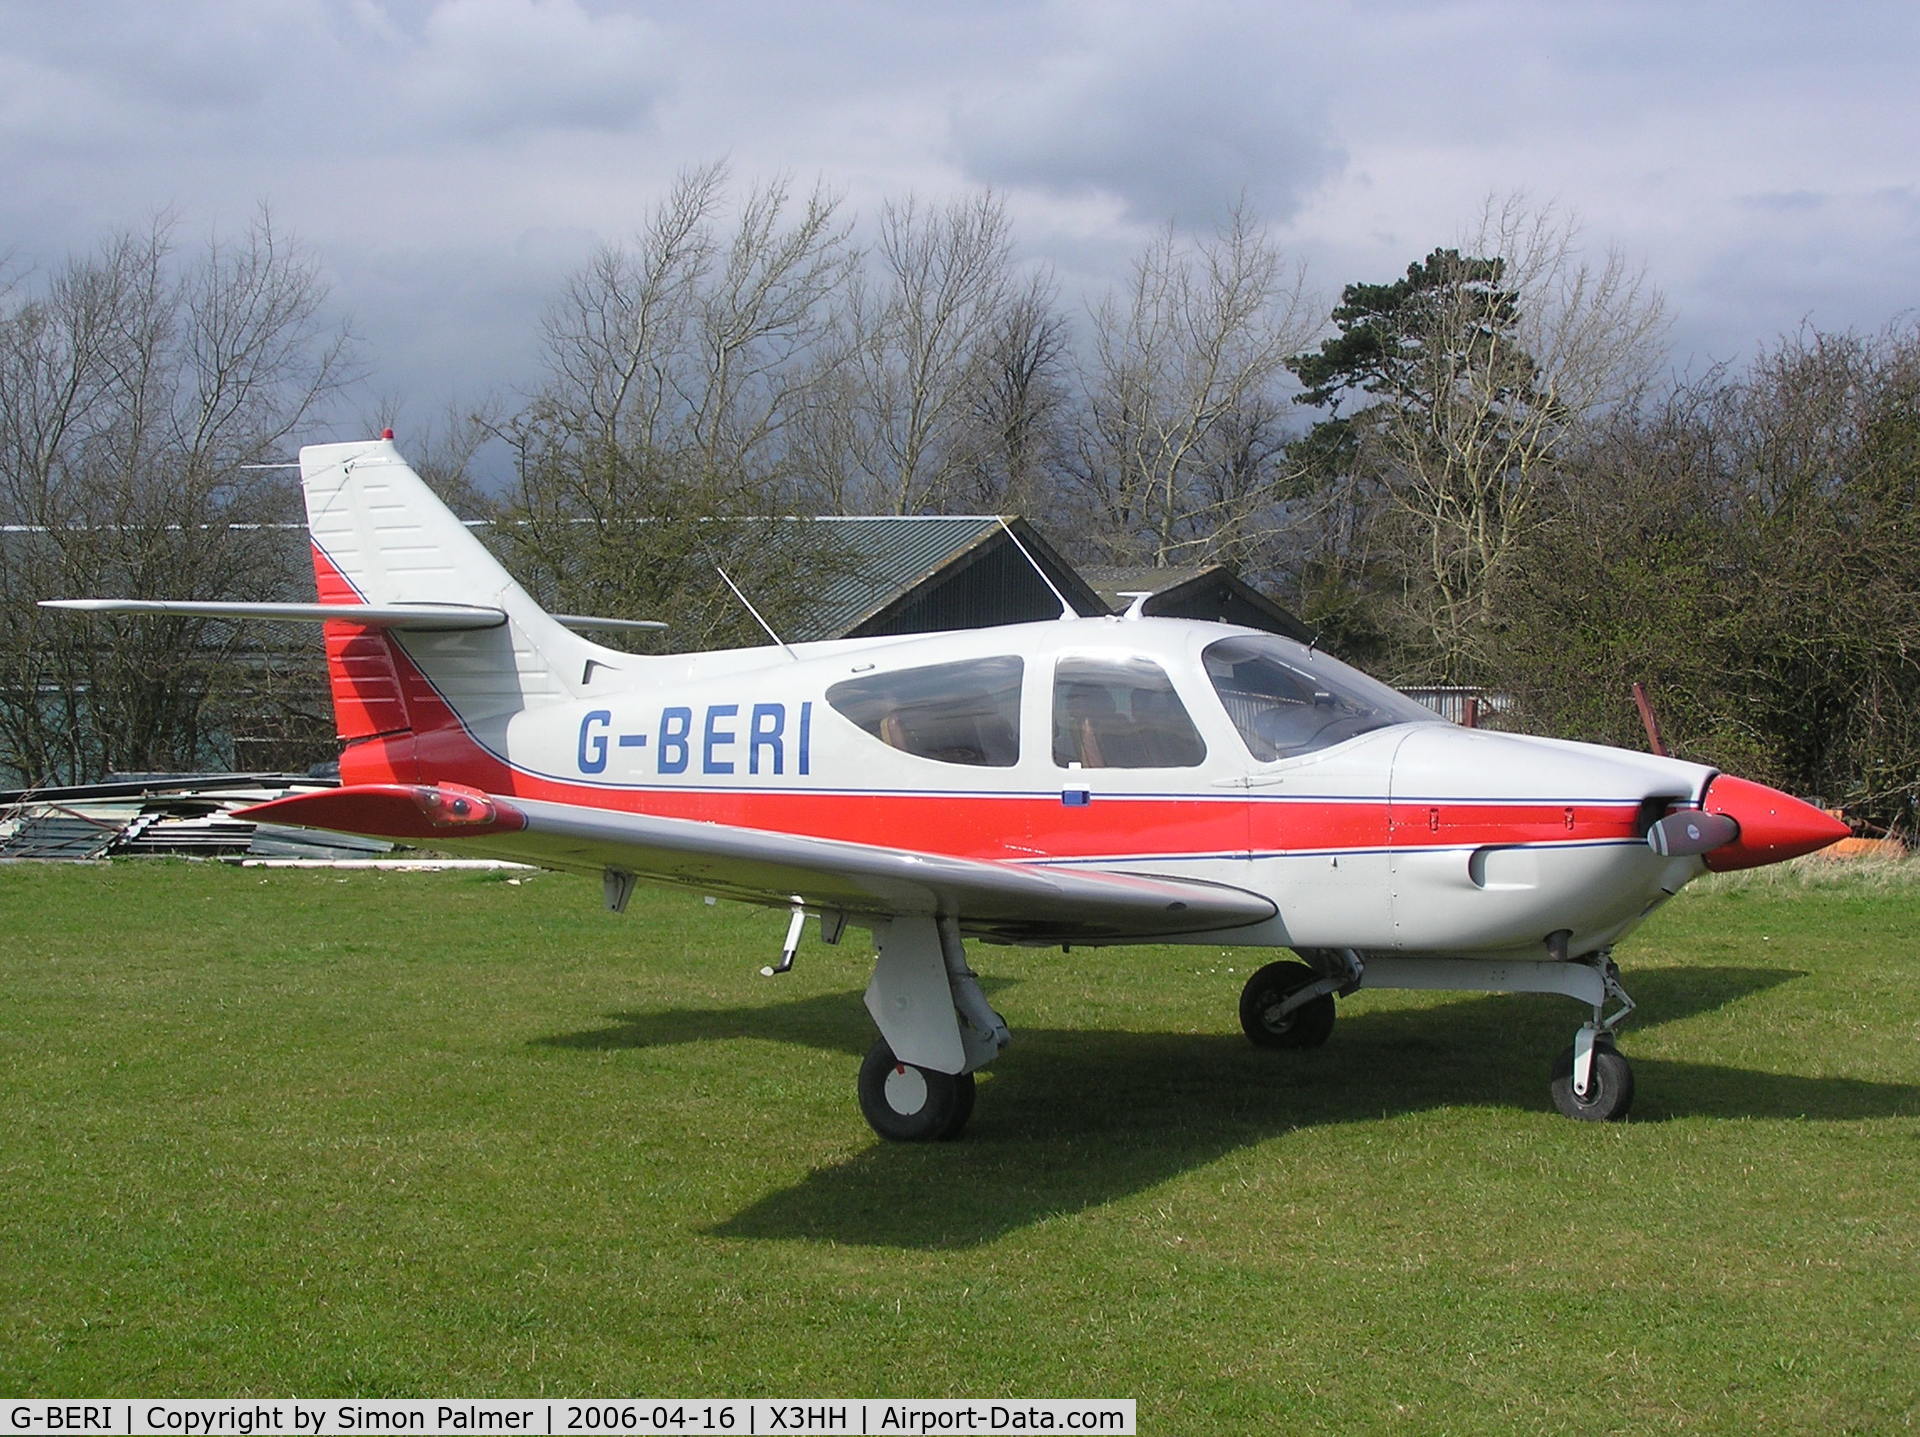 G-BERI, 1977 Rockwell Commander 114 C/N 14234, Rockwell Commander 114 at Hinton-in-the-Hedges